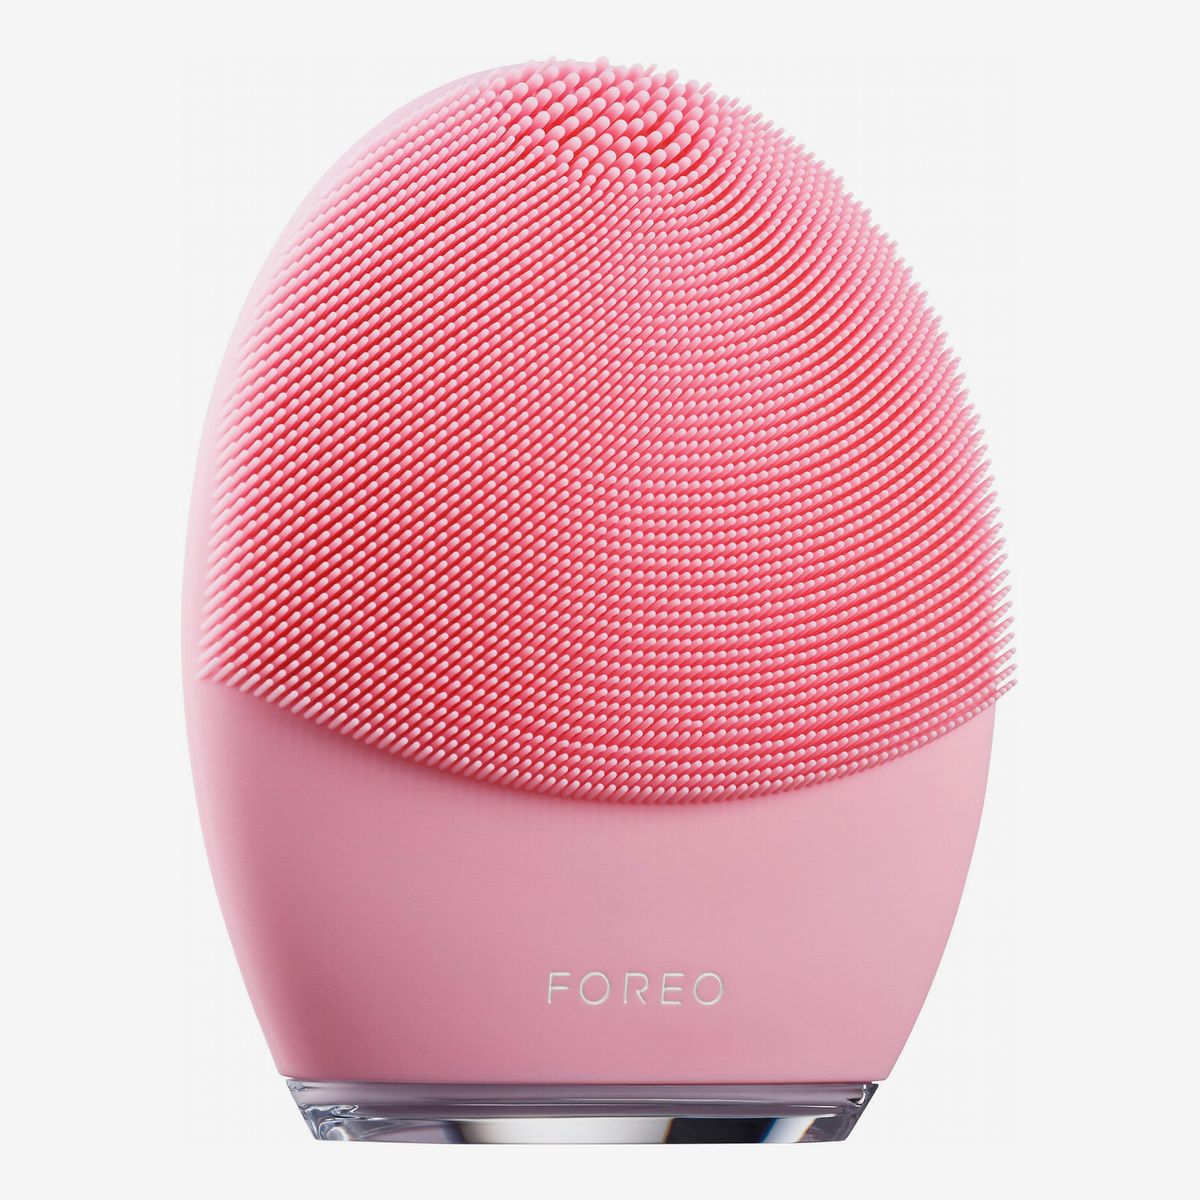 7 Best Facial-Cleansing Brushes 2019 | The Strategist